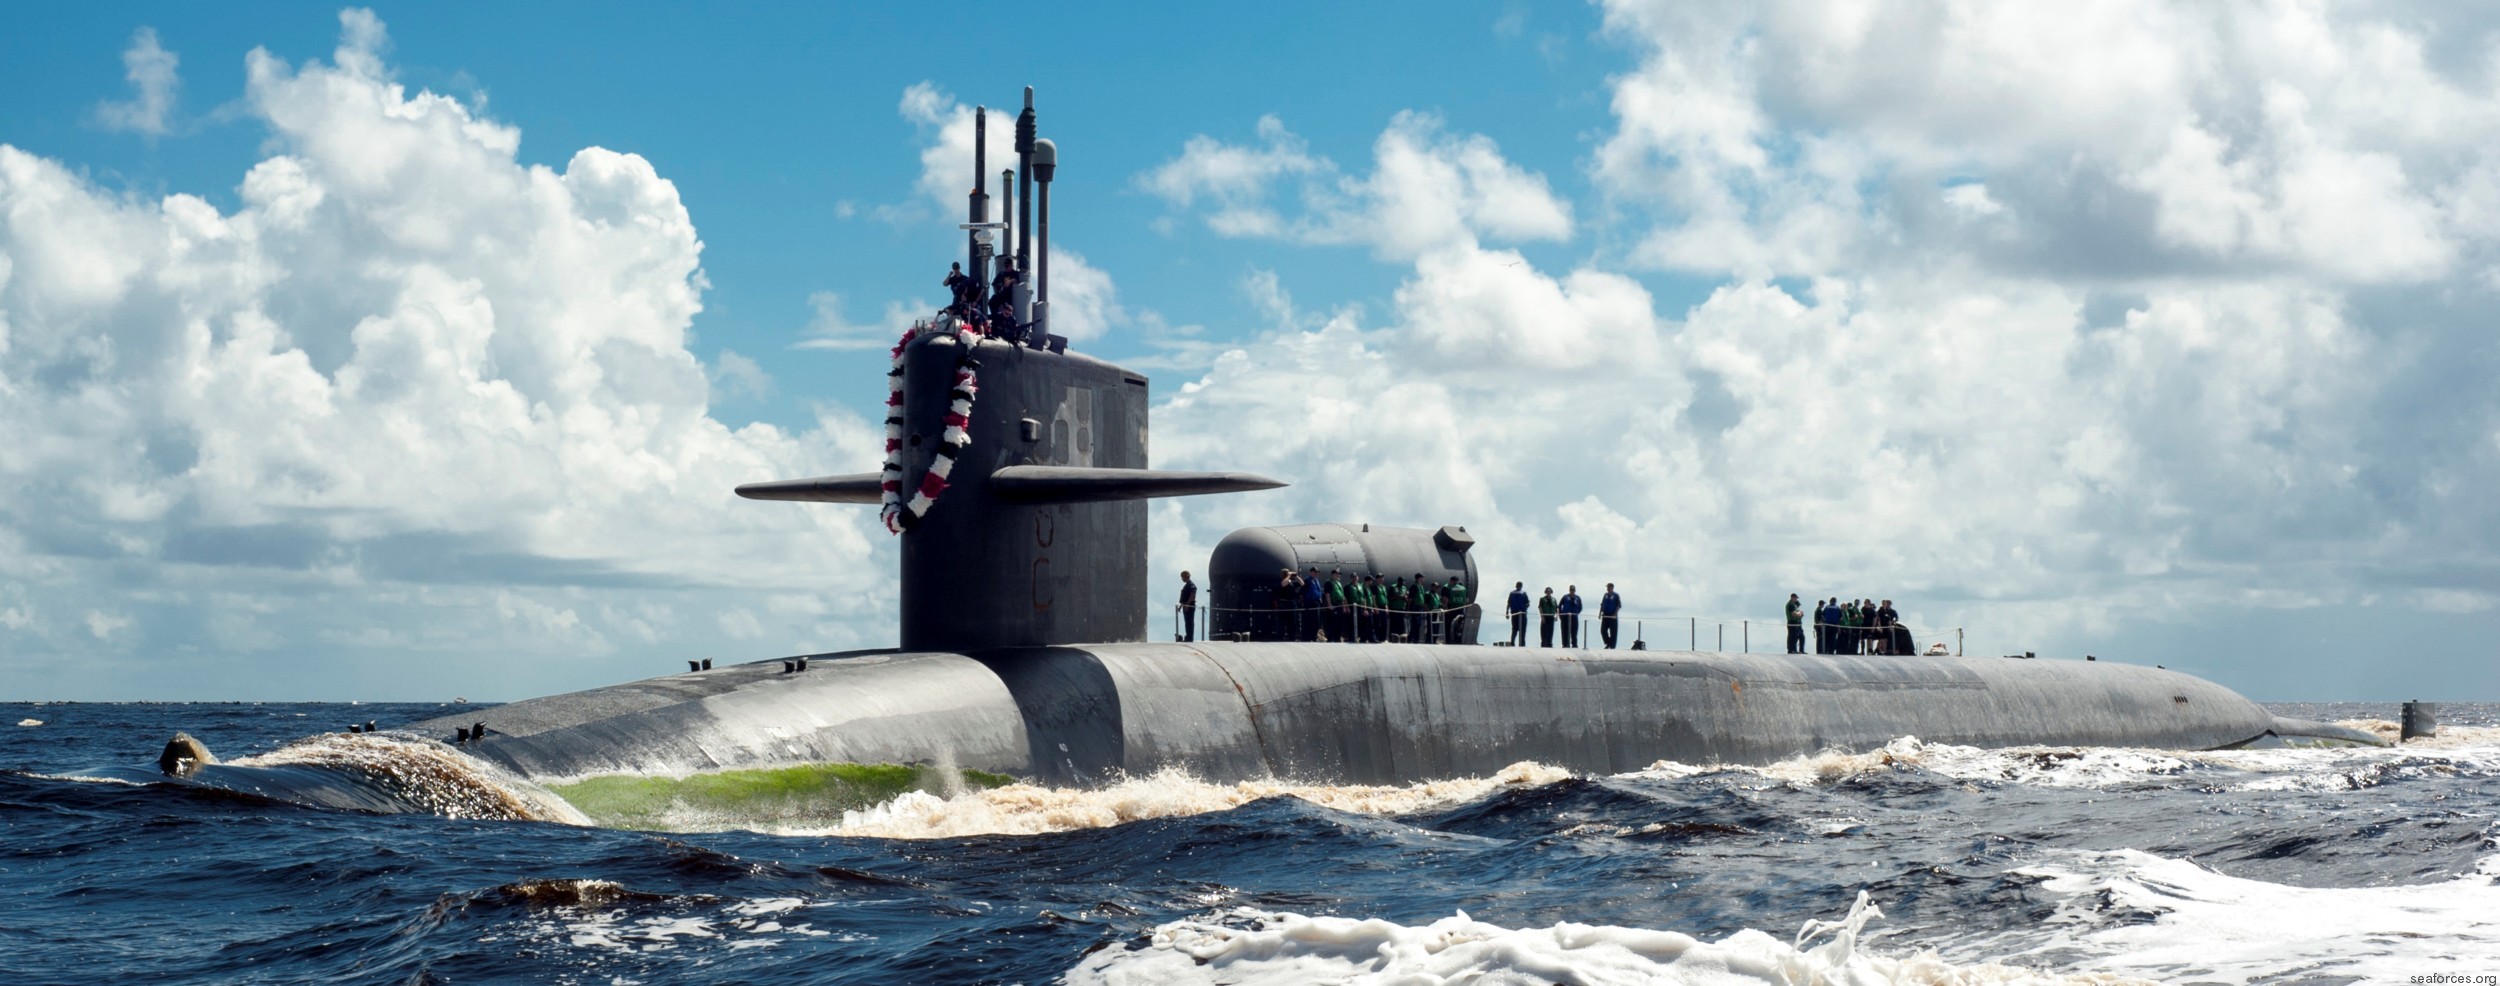 ssgn-729 uss georgia guided missile submarine 2012 18